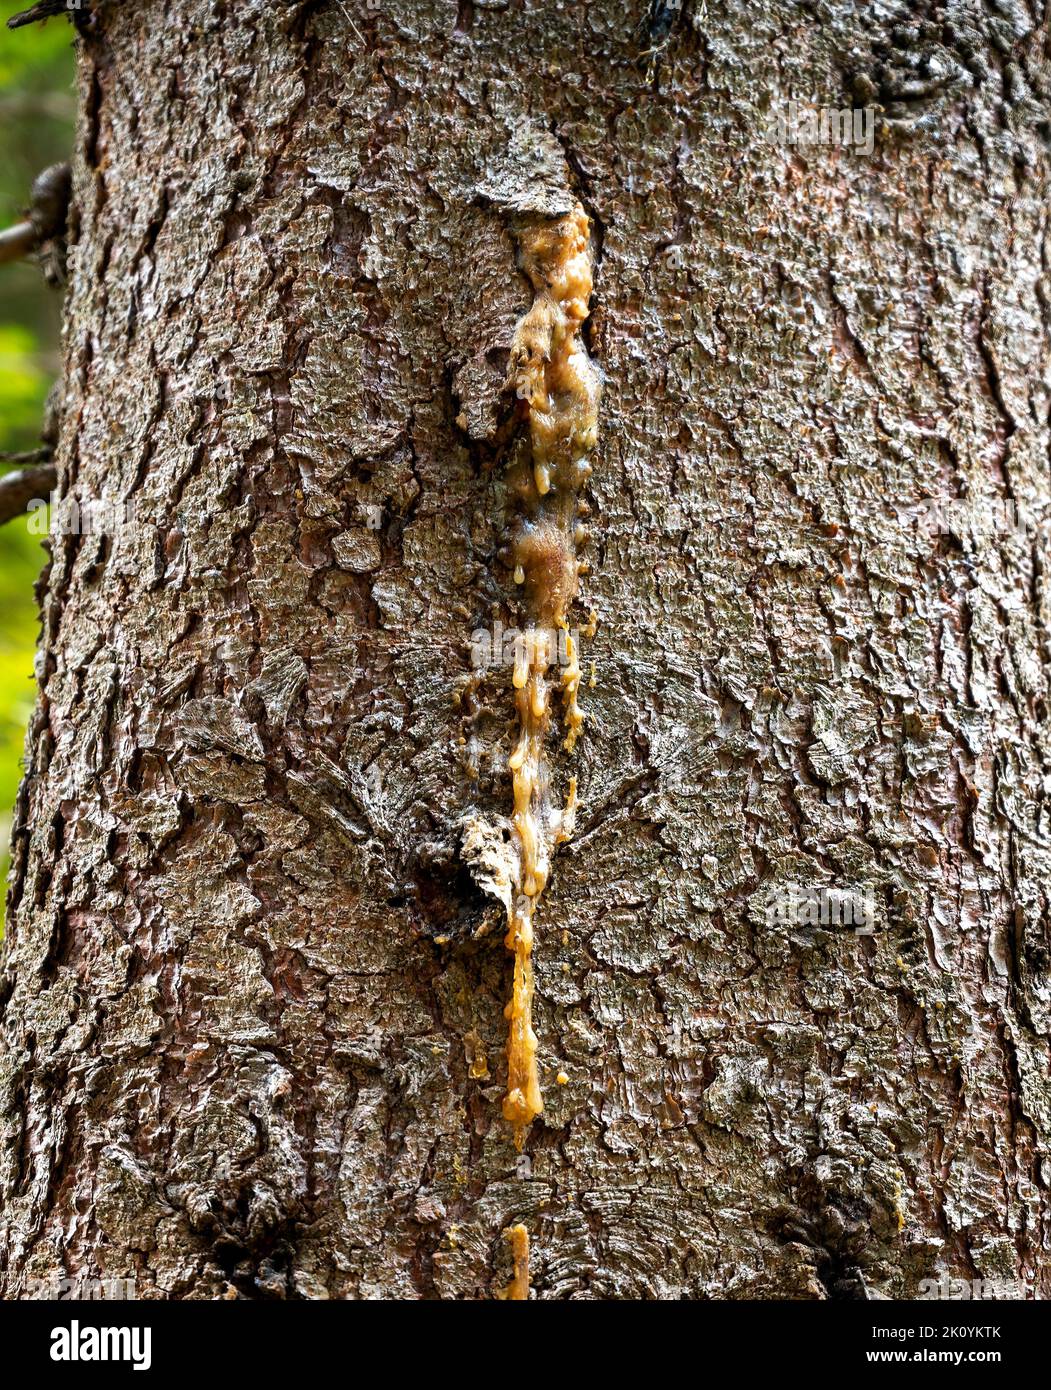 resin leaks out of the trunk of a conifer tree with rough bark Stock Photo